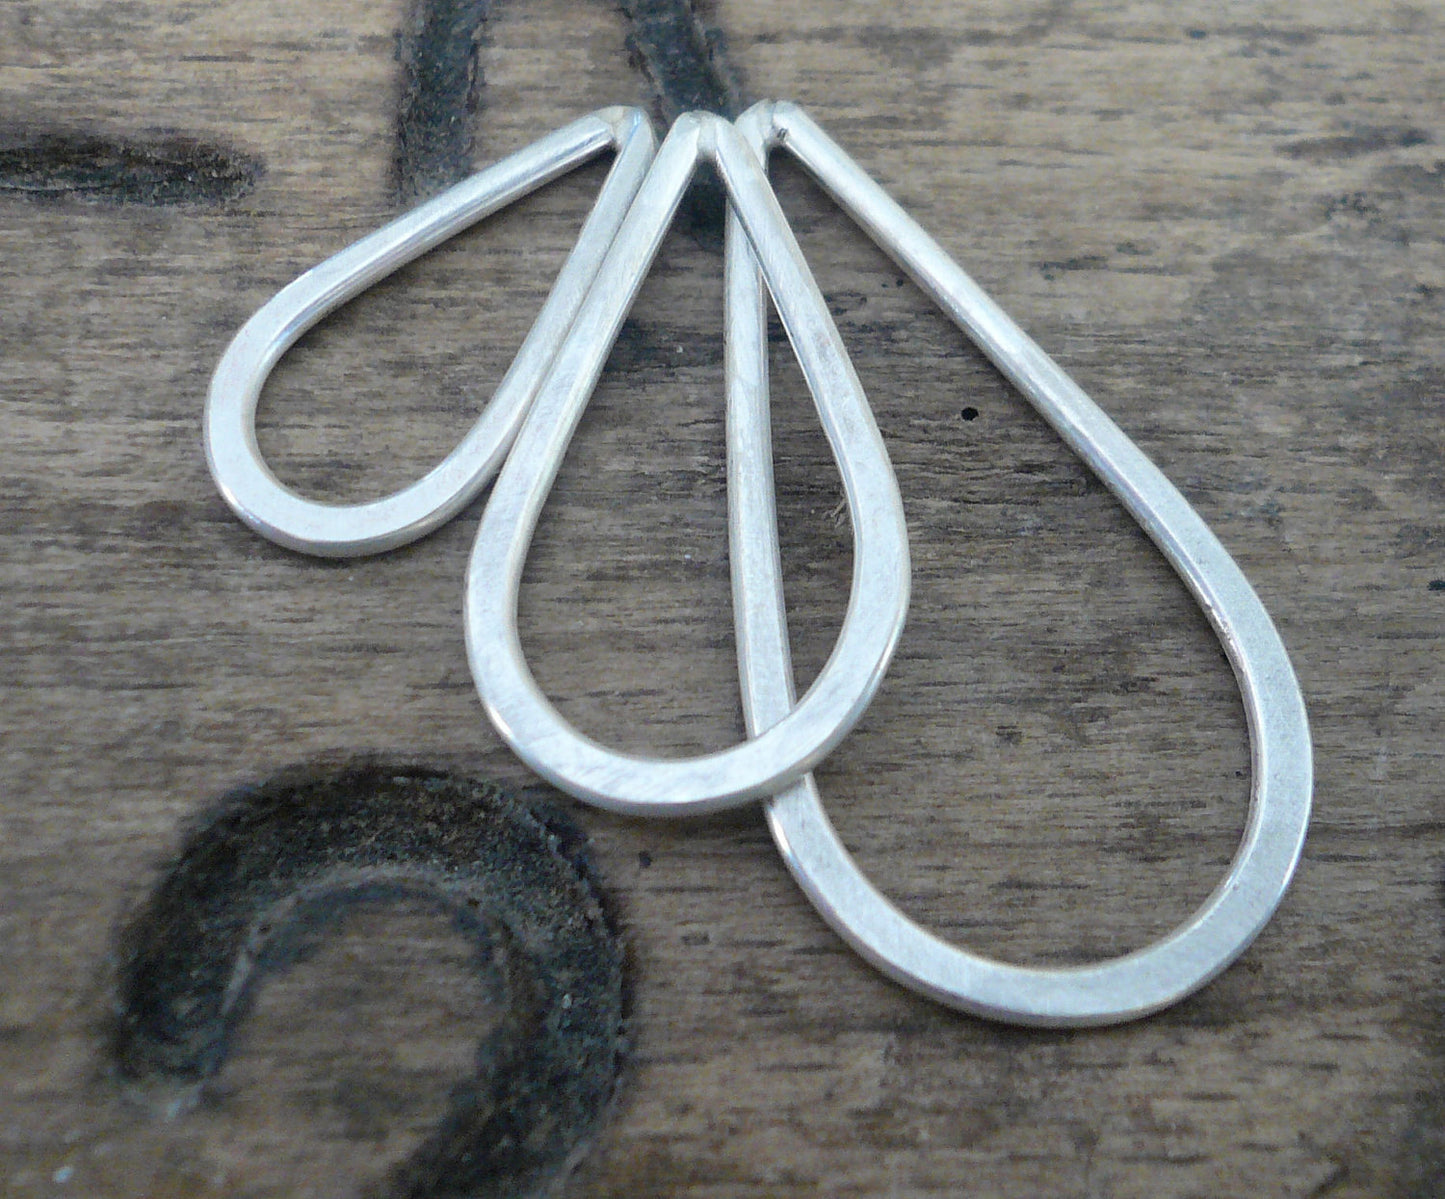 Small Handforged Oxidized Sterling Silver Tear Drops - Handmade. Hand forged. 17mm. 1 pair